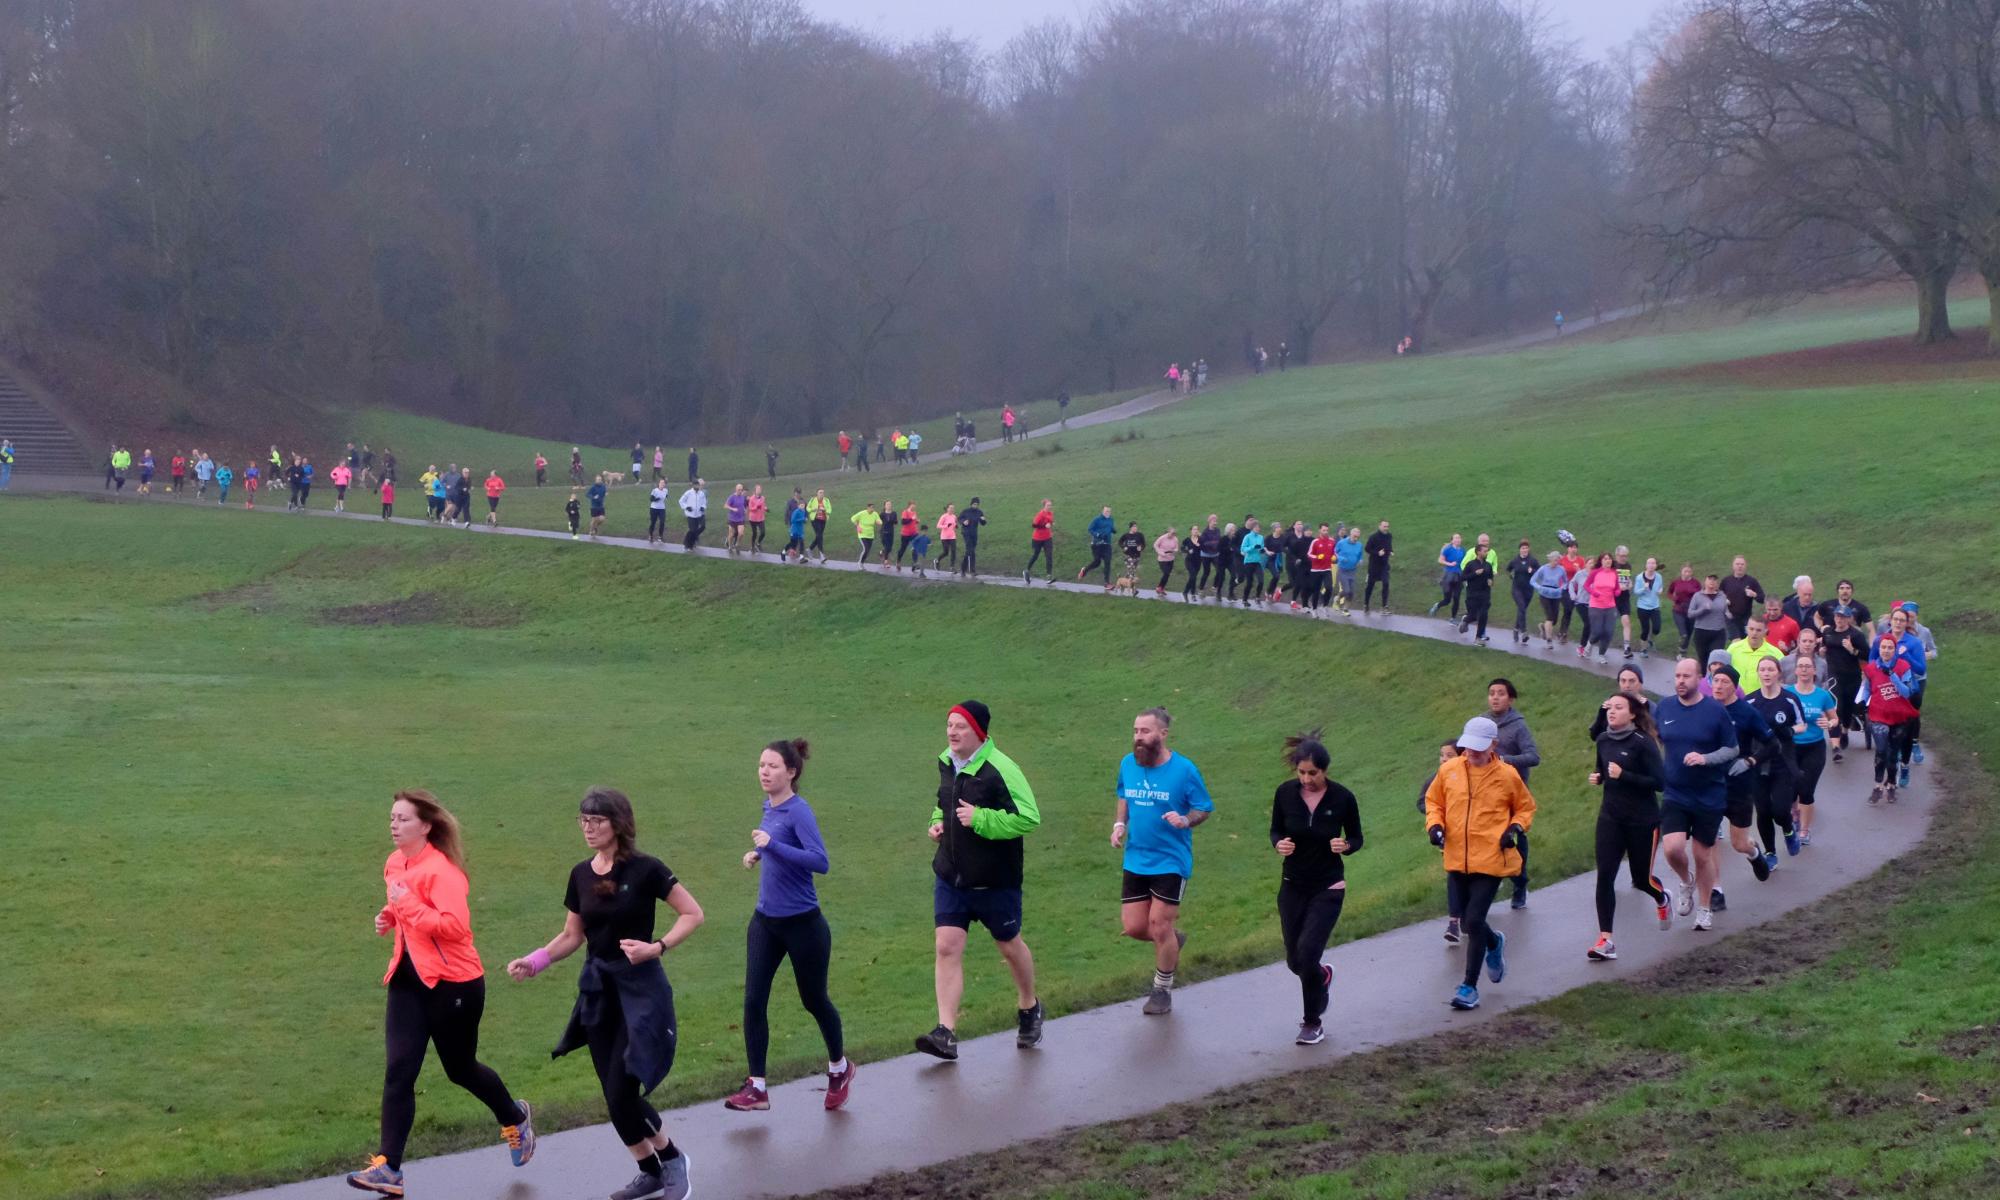 parkrun, trans athletes and fairness to women